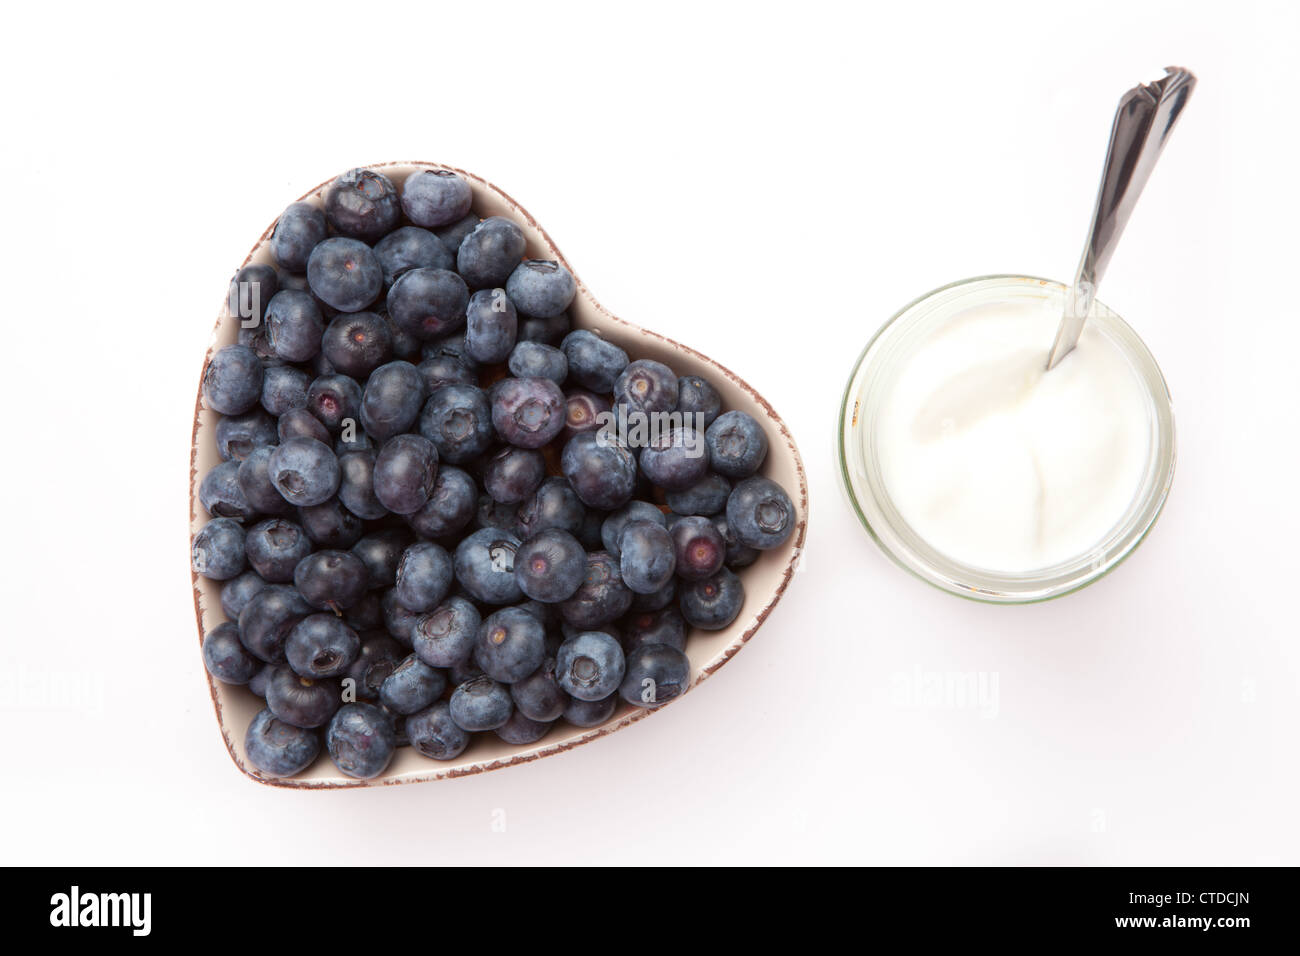 White yogurt and blueberries in a heart shaped bowl Stock Photo